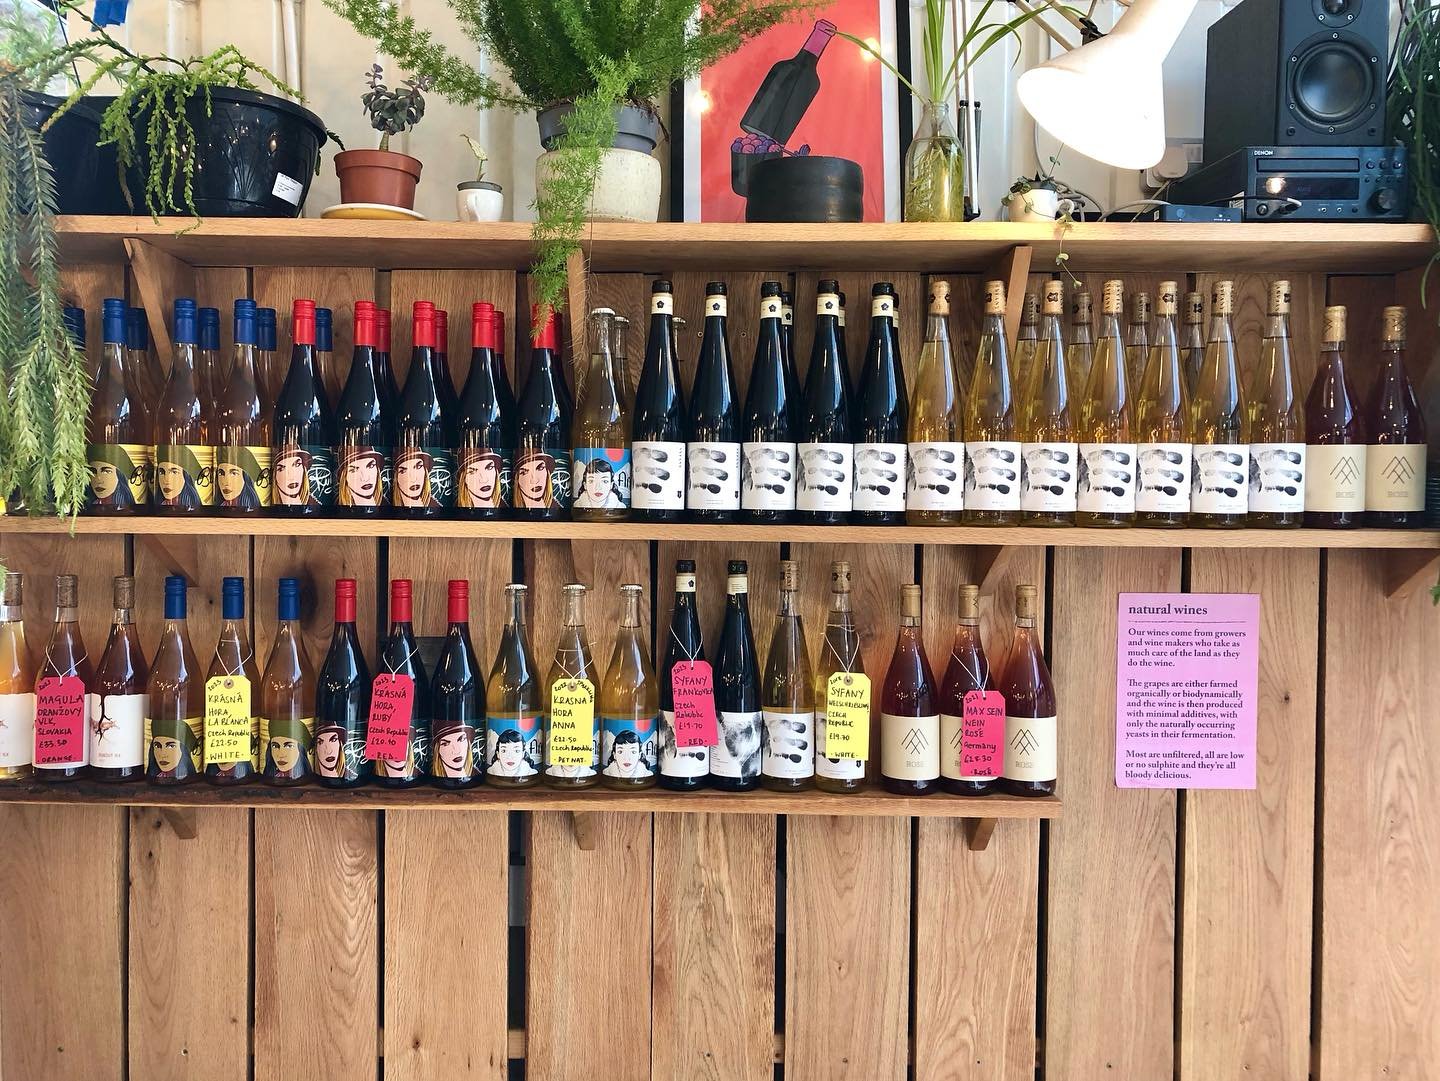 Wine up, wine up! 

You'll be on cloud wine with these lovely new wines from @basket_press_wines we have. Whether it's for your partners in wine or having some wine down time at home, we've got something for you. 

If you have any better wine puns pl